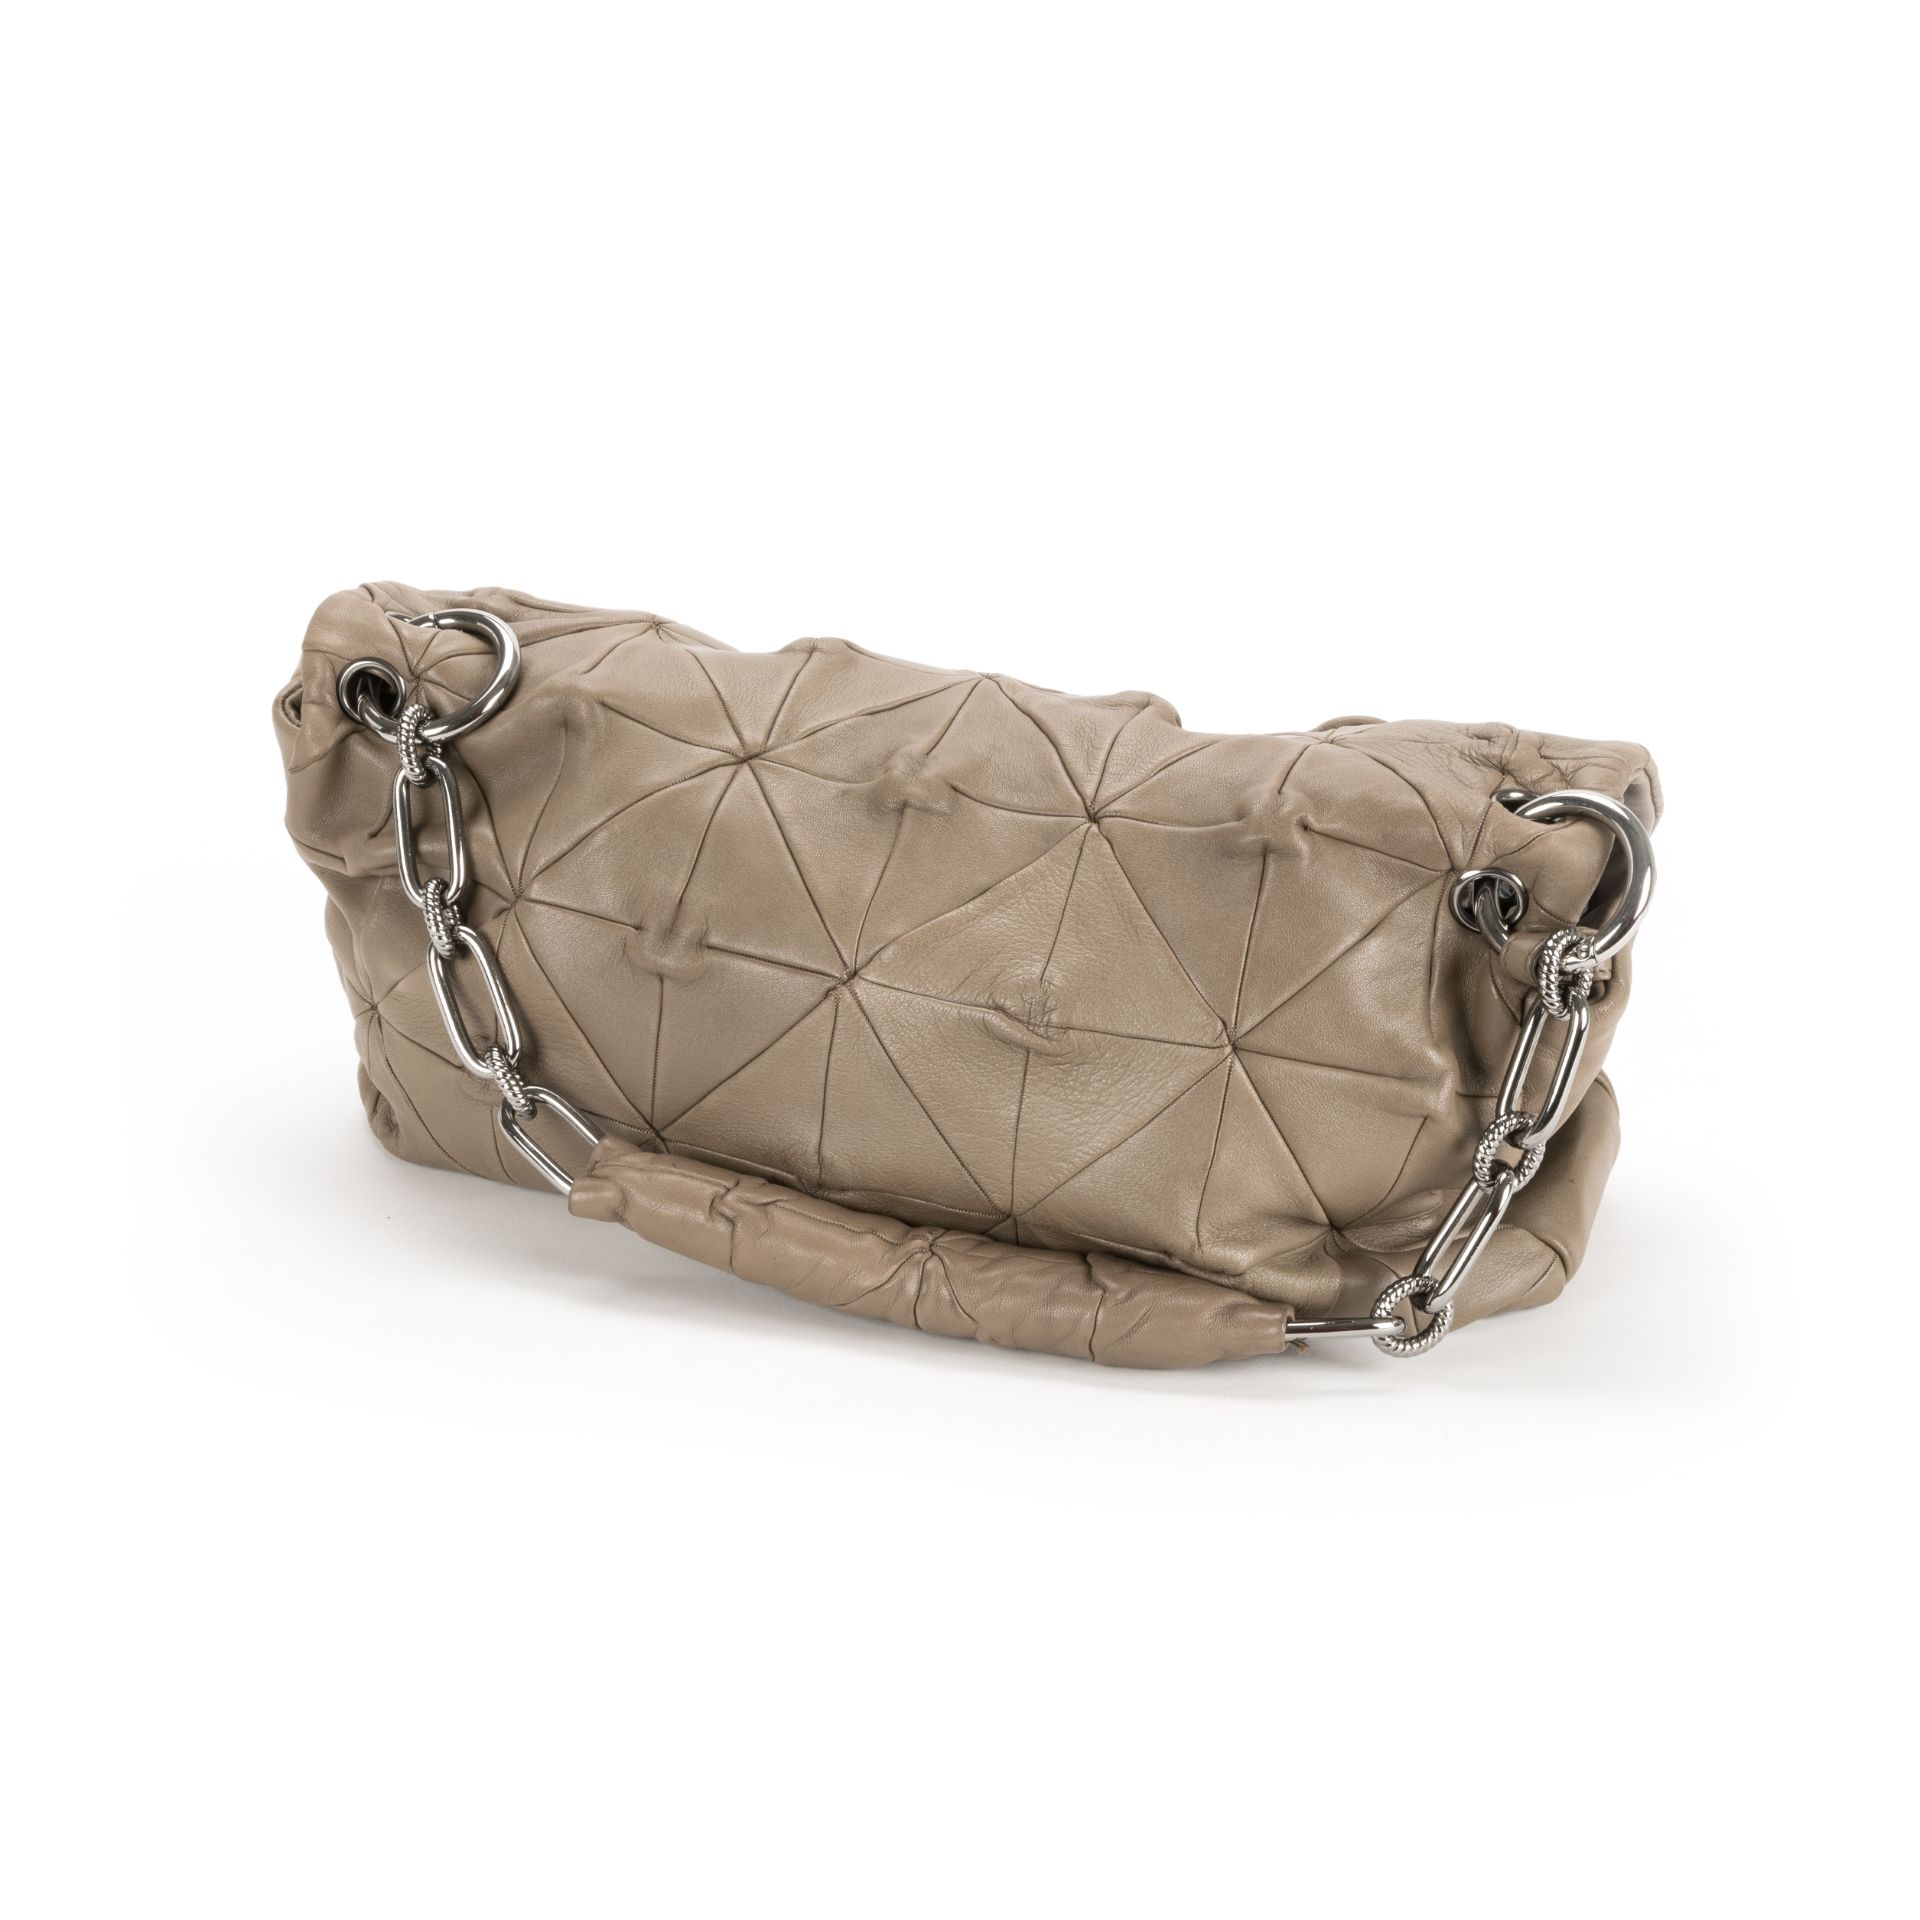 Chanel Schultertasche - Image 5 of 8